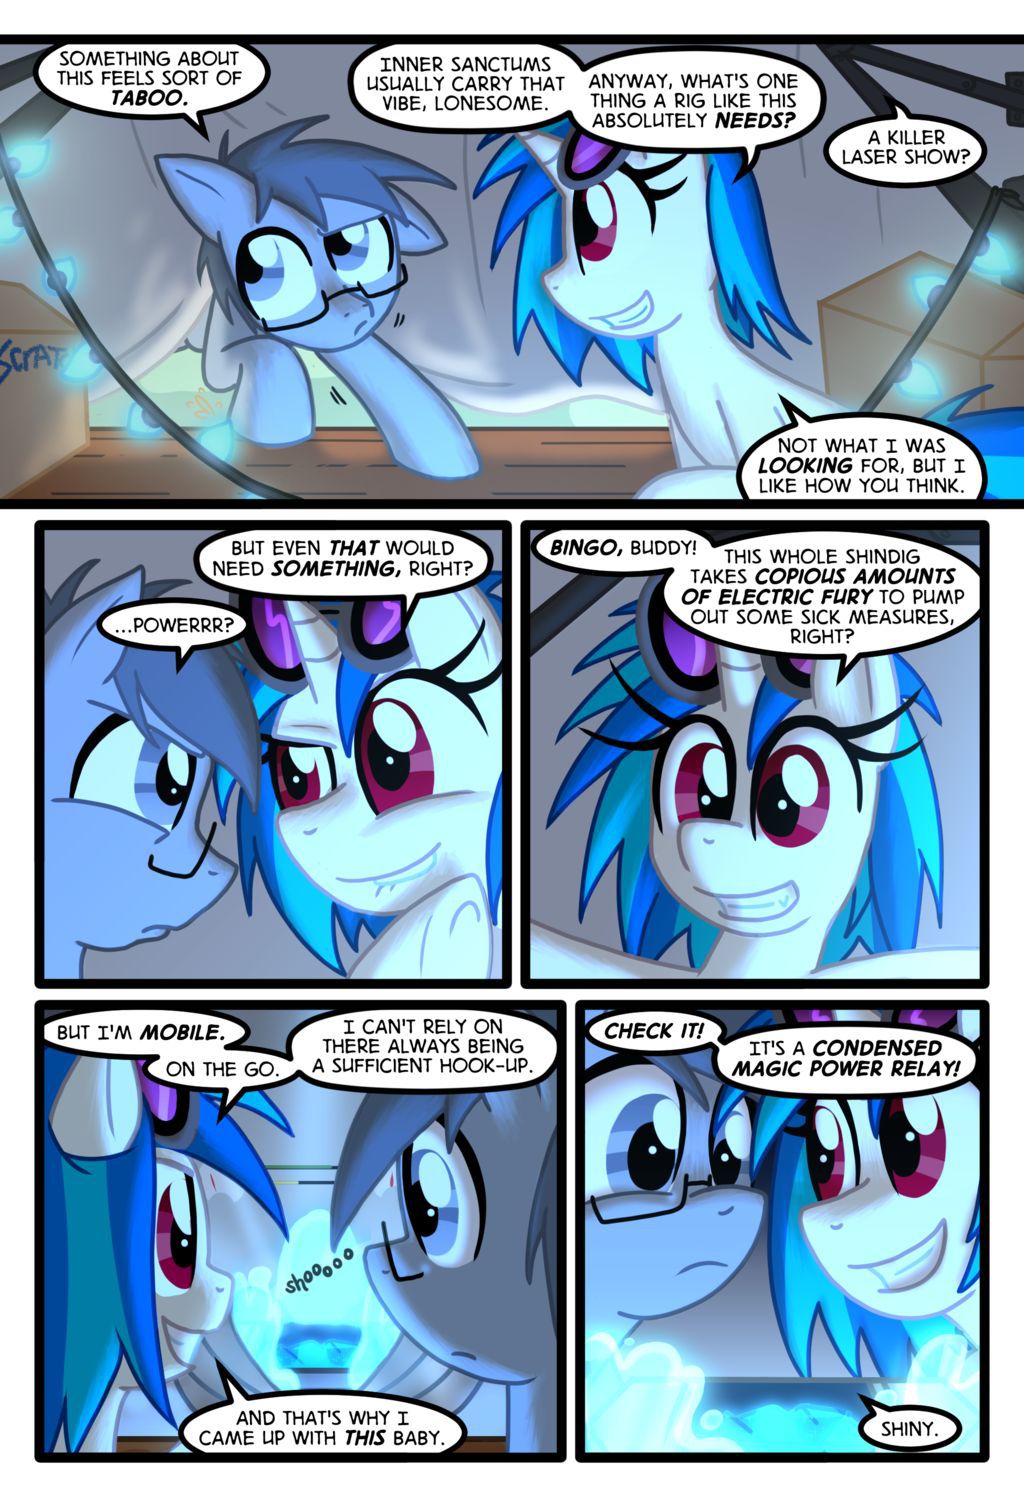 [Zaron] Lonely Hooves (My Little Pony: Friendship is Magic) [English] [Ongoing] 54